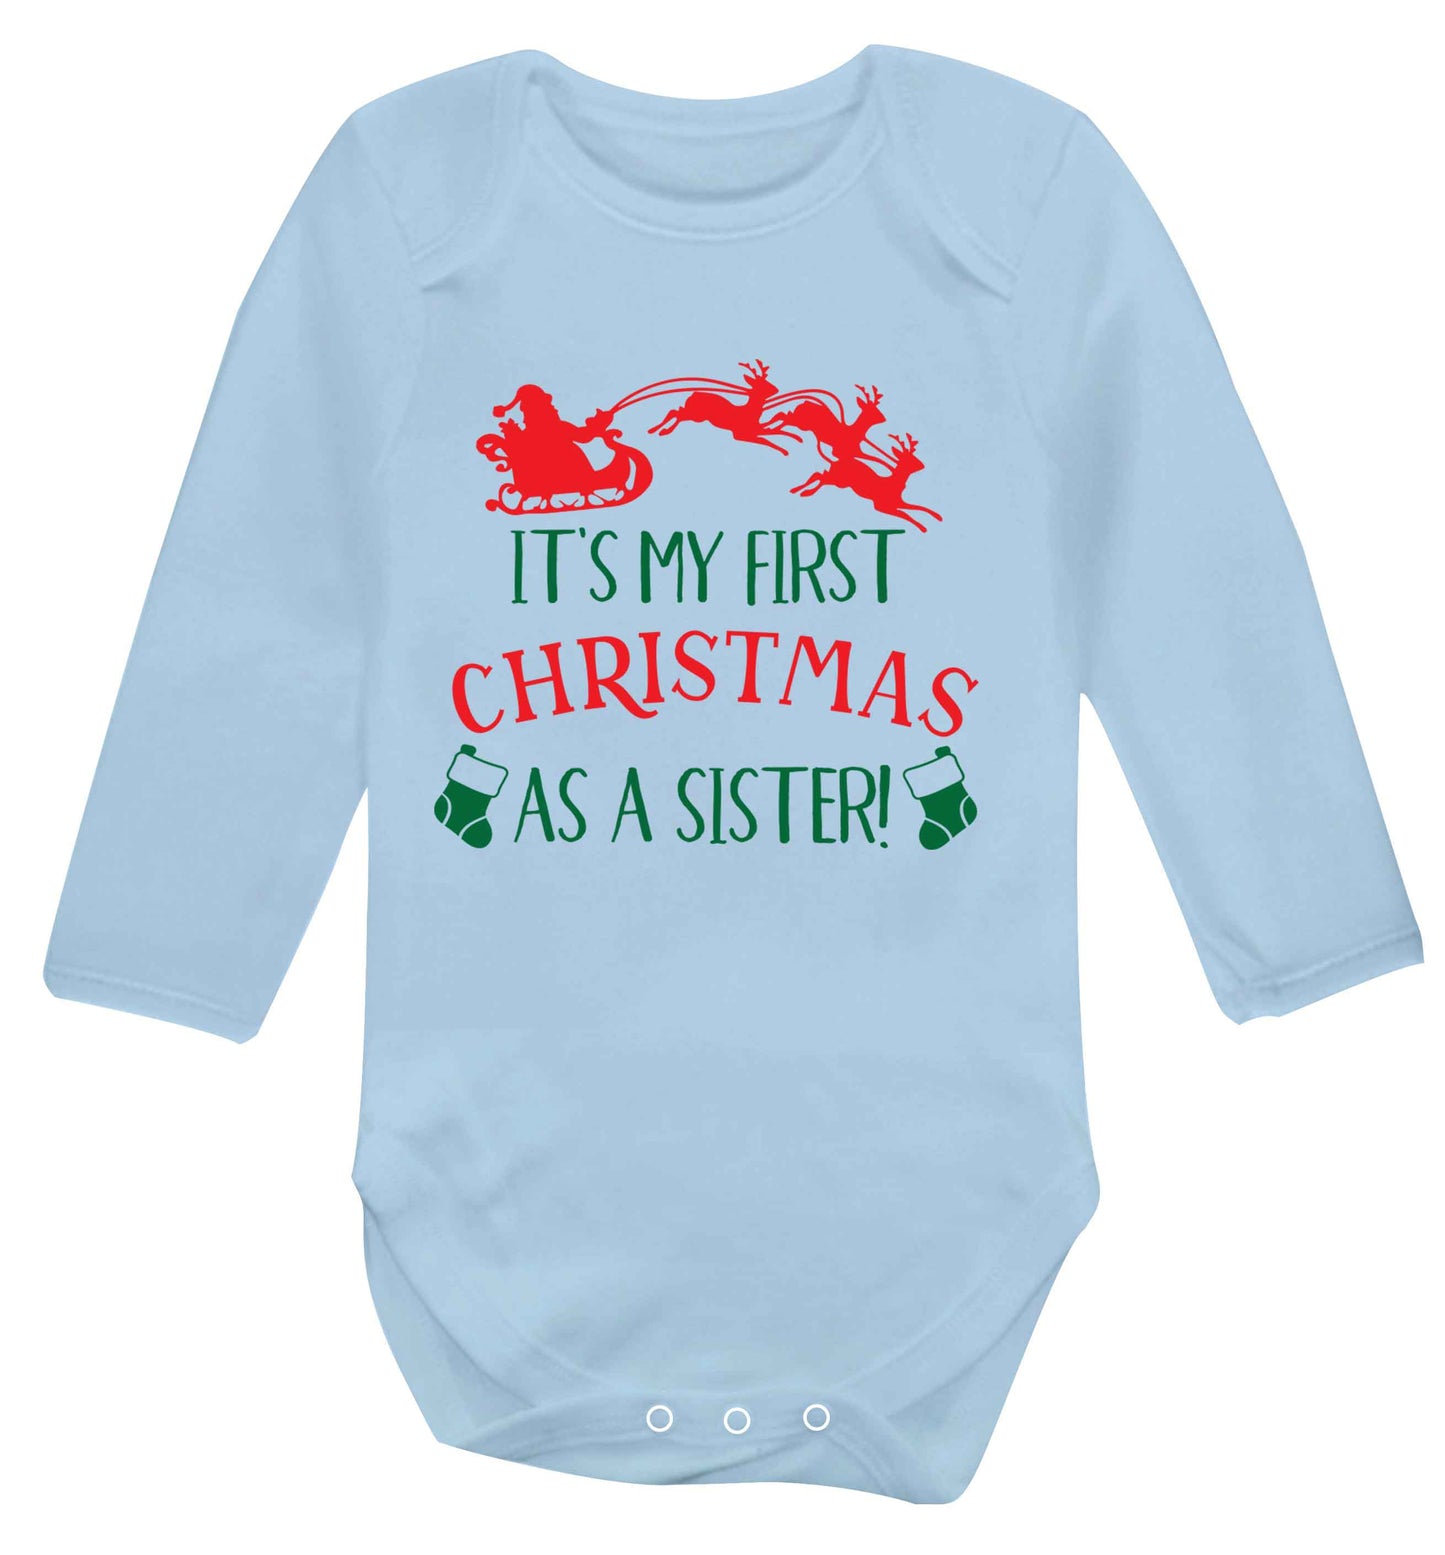 It's my first Christmas as a sister! Baby Vest long sleeved pale blue 6-12 months